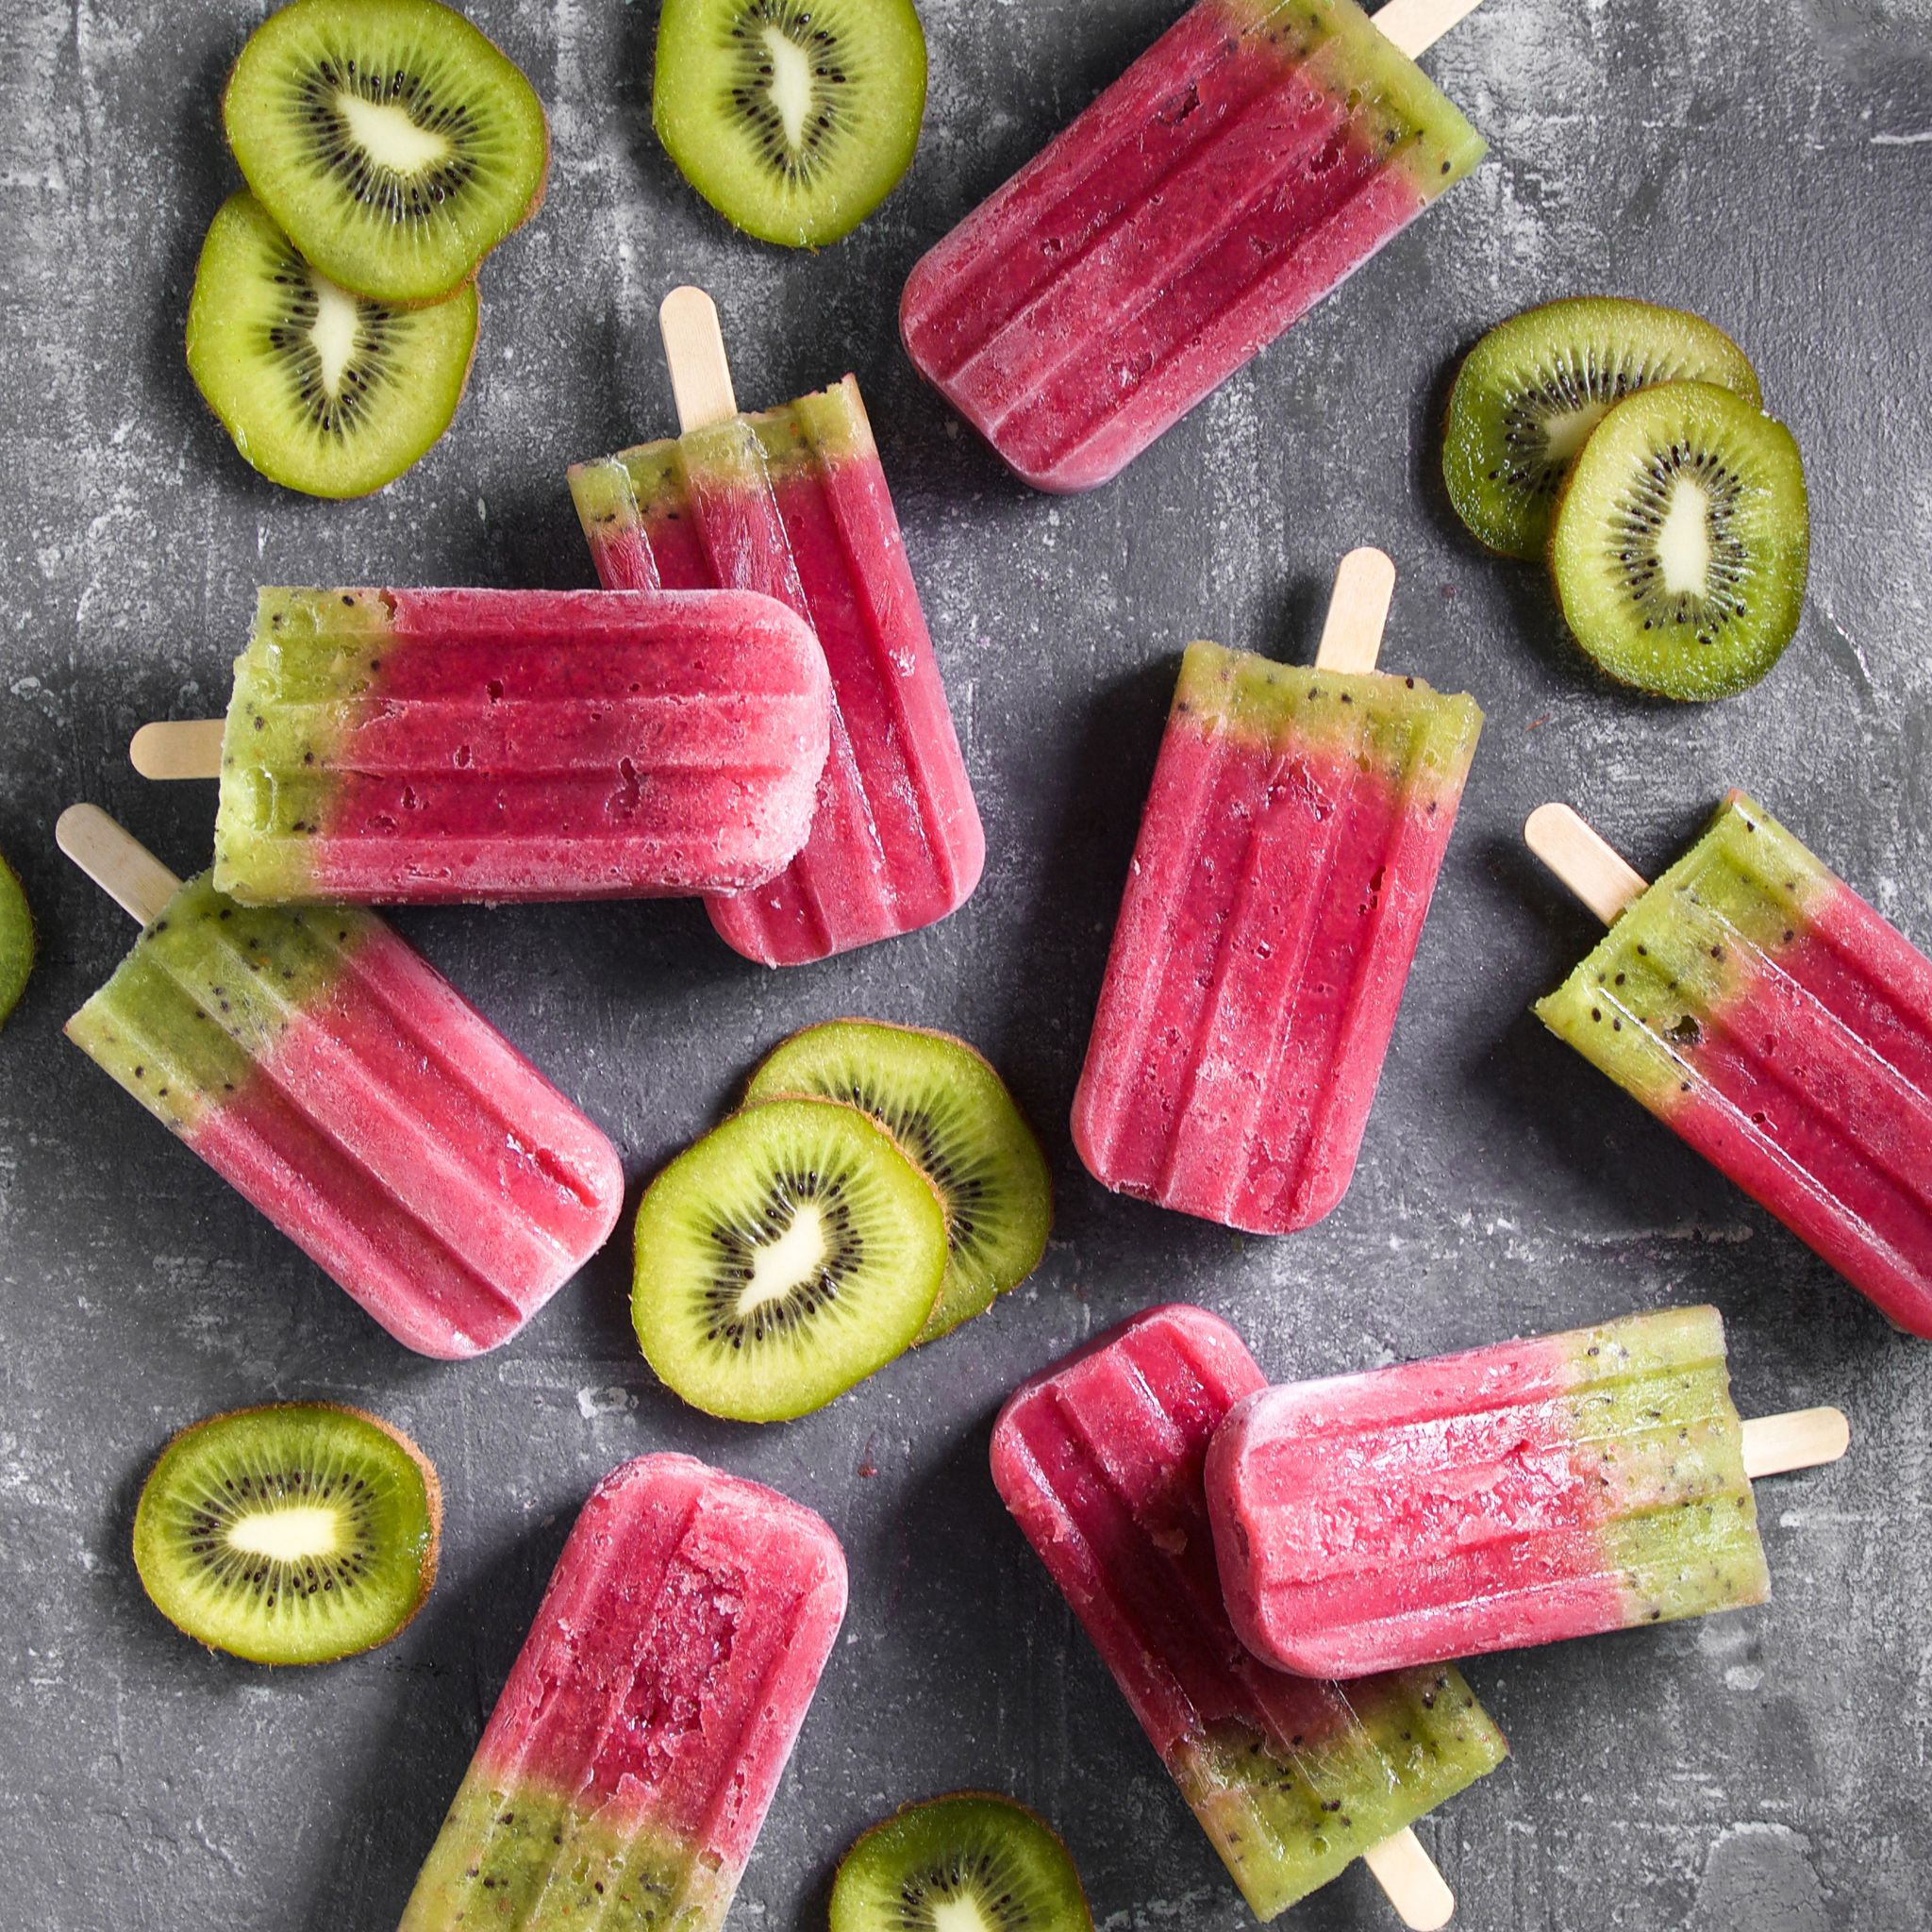 https://hips.hearstapps.com/hmg-prod/images/the-groovy-food-company-agave-watermelon-ice-lollies-1563290443.jpg?crop=1.00xw:1.00xh;0,0&resize=2048:*